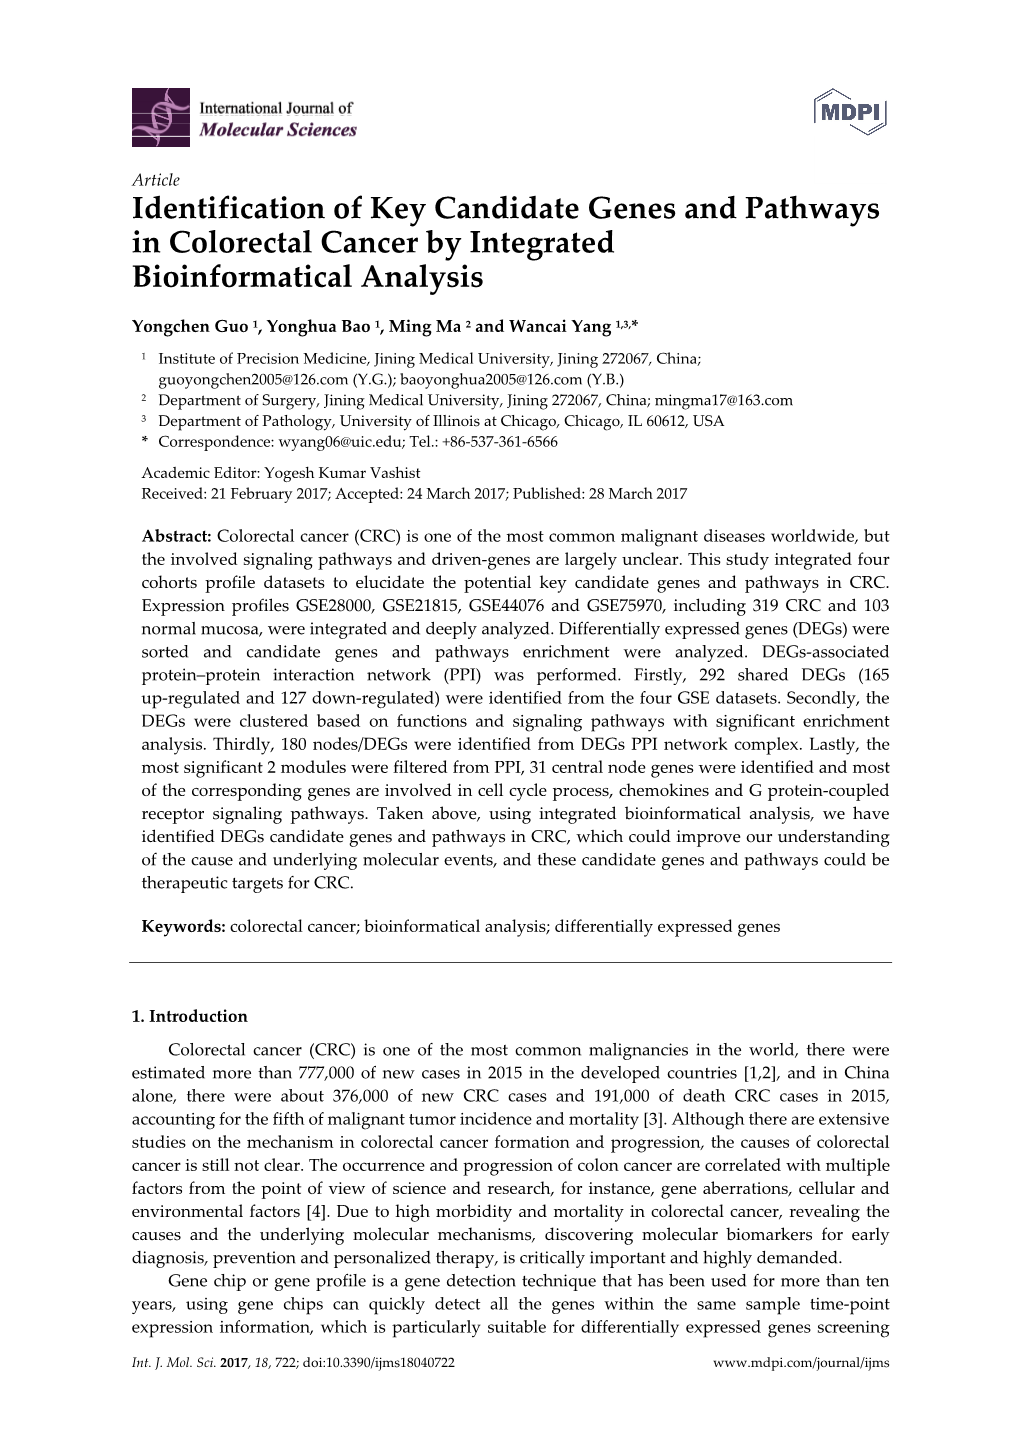 Identification of Key Candidate Genes and Pathways in Colorectal Cancer by Integrated Bioinformatical Analysis